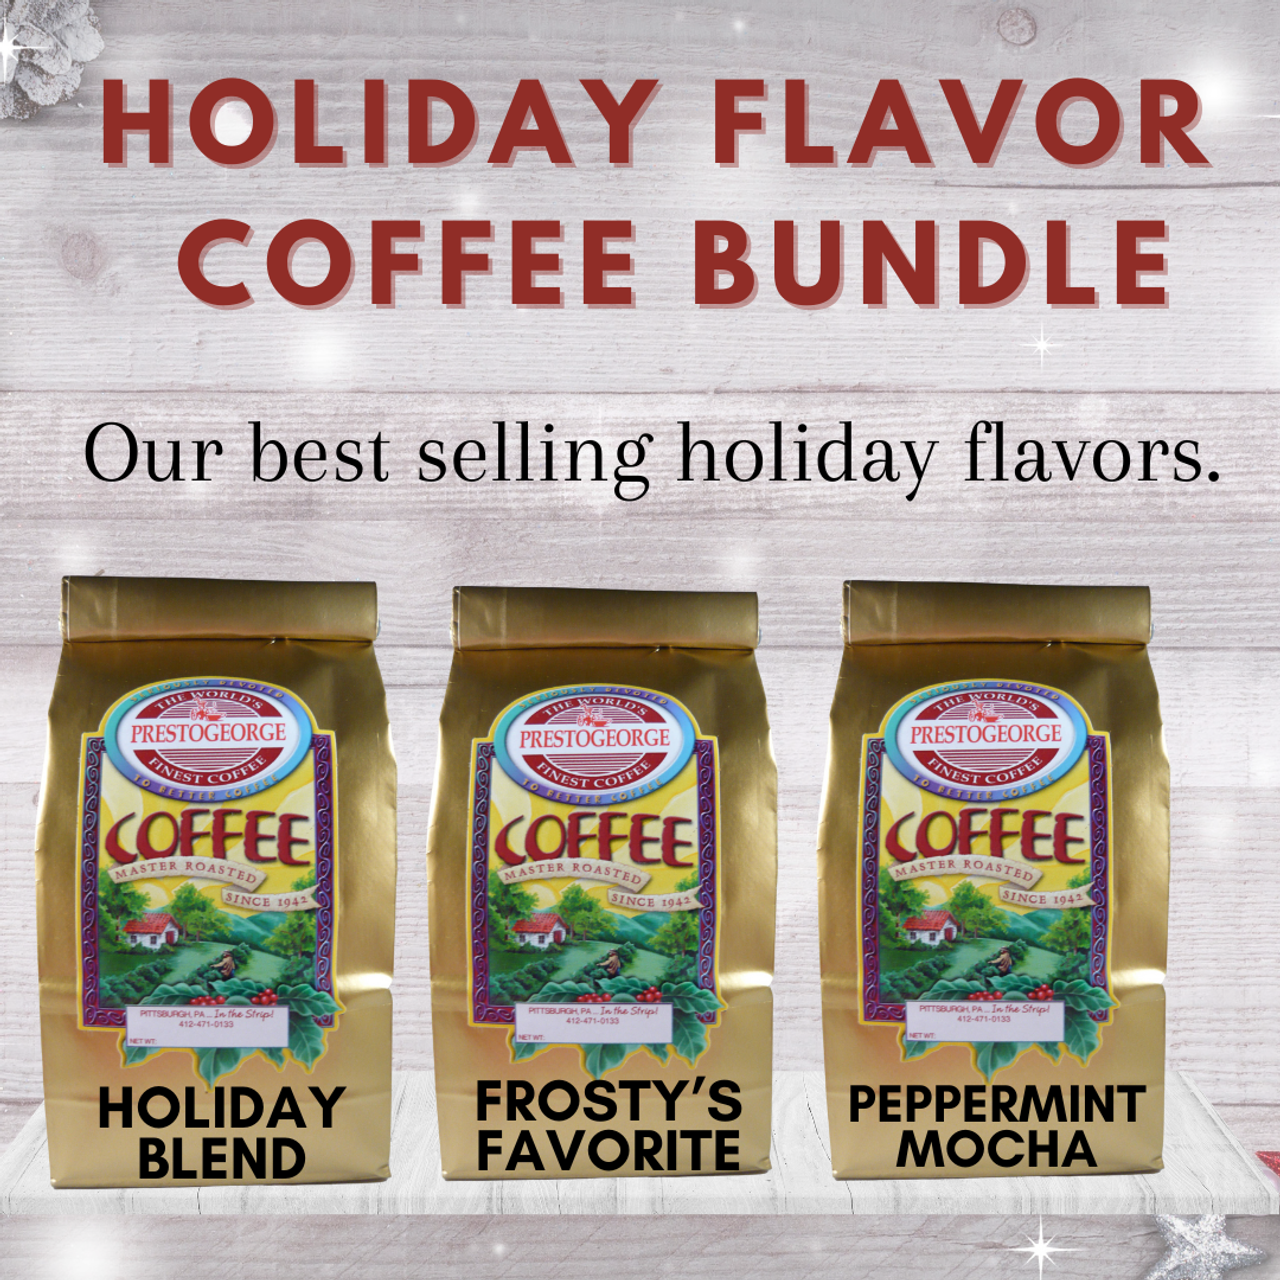 https://cdn11.bigcommerce.com/s-515m7/images/stencil/1280x1280/products/5610/8324/HolidayFlavoredCoffeeBundle-1__43991.1704291841.png?c=2